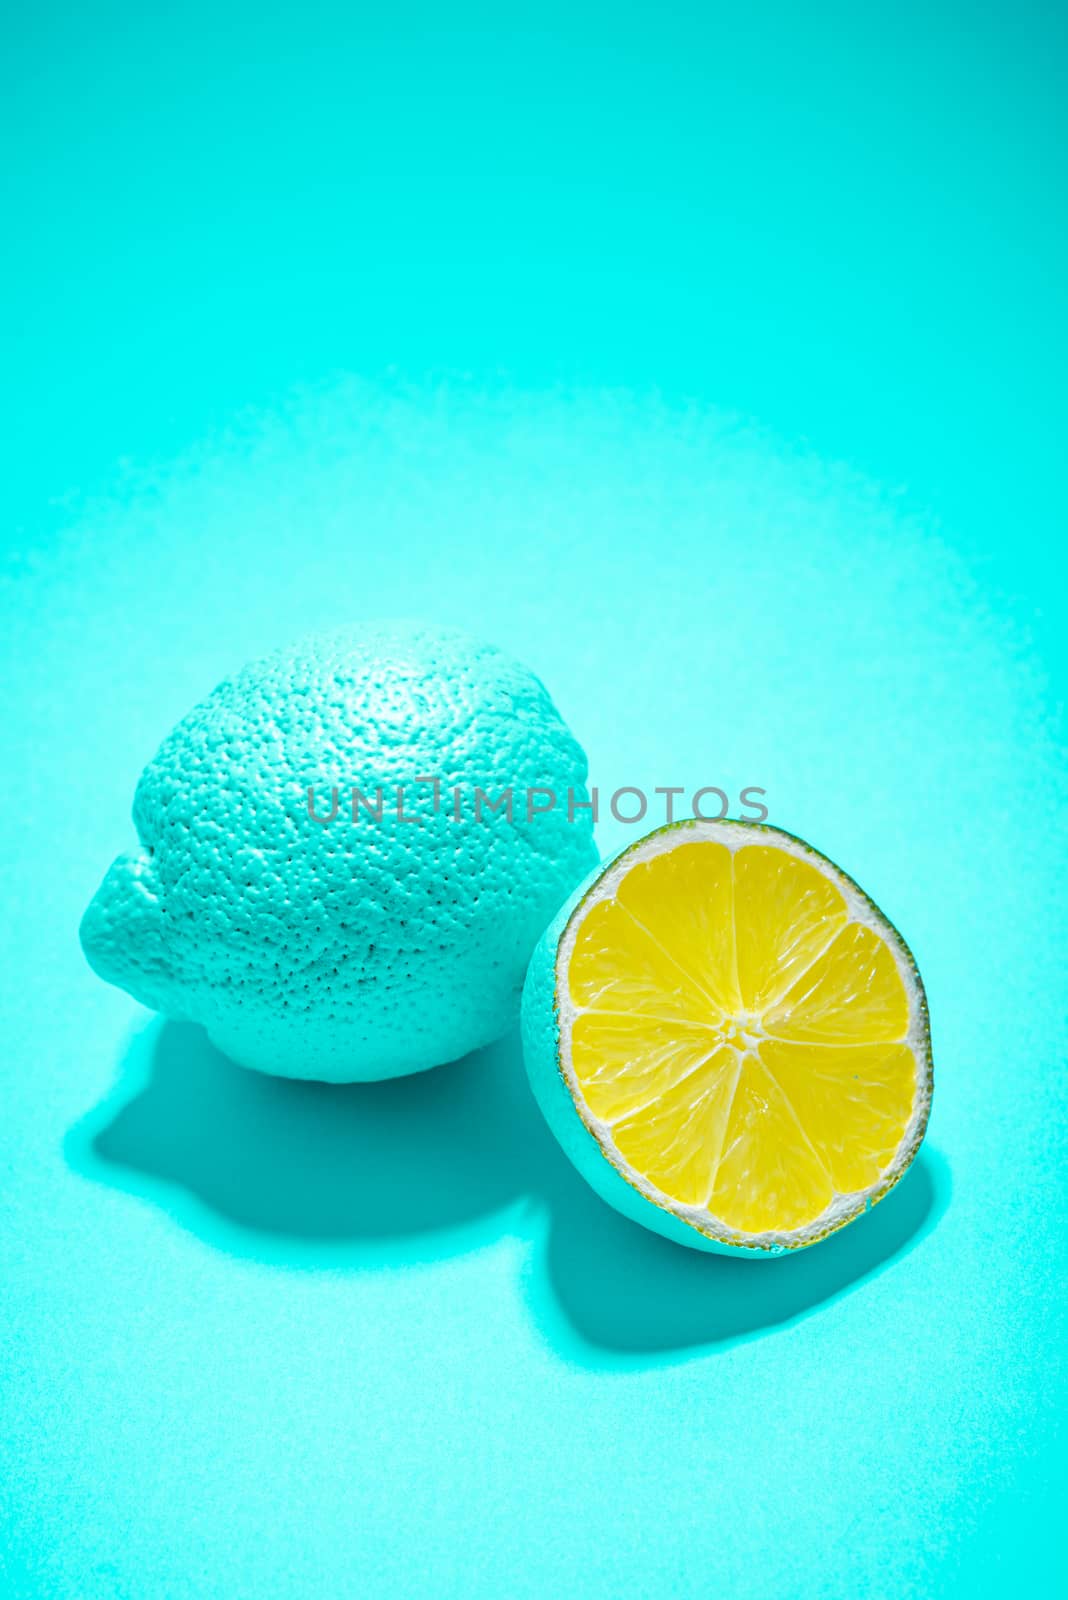 Blue Abstract Lemon Fruit Whole and Cut Half on Pastel Blue Background.